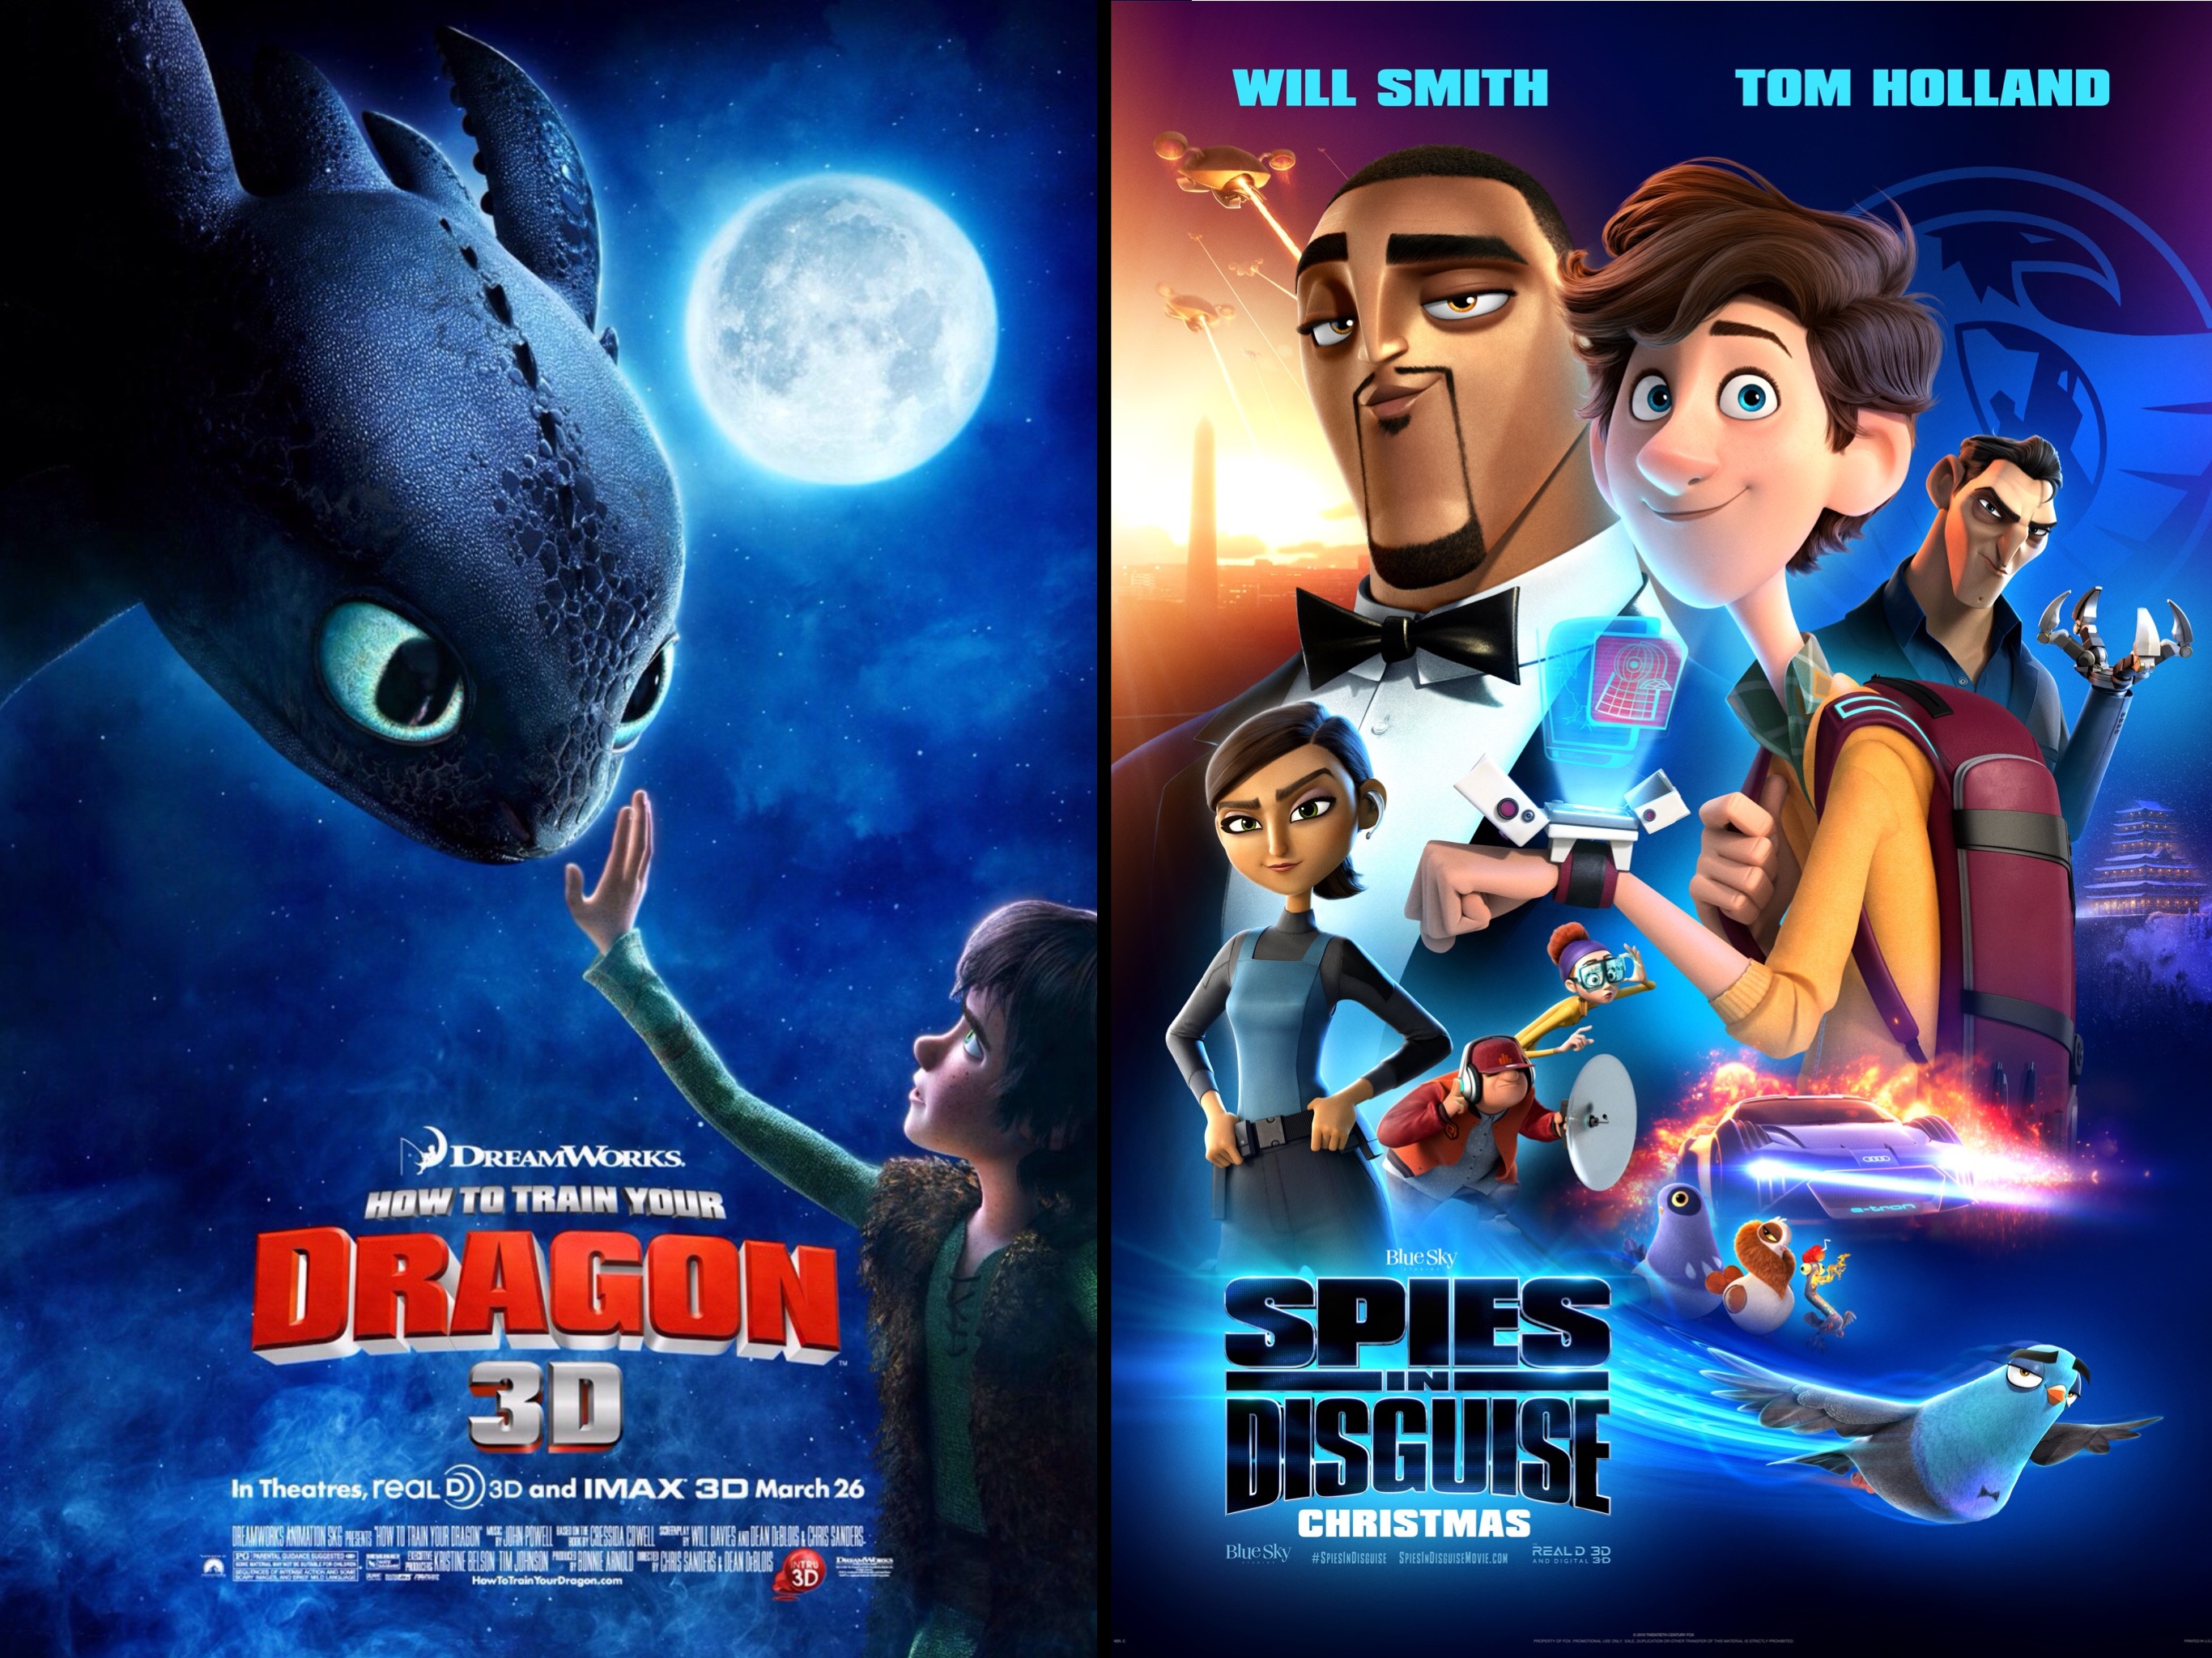 First and Last Animated Movies of 2010's by JustSomePainter11 on DeviantArt